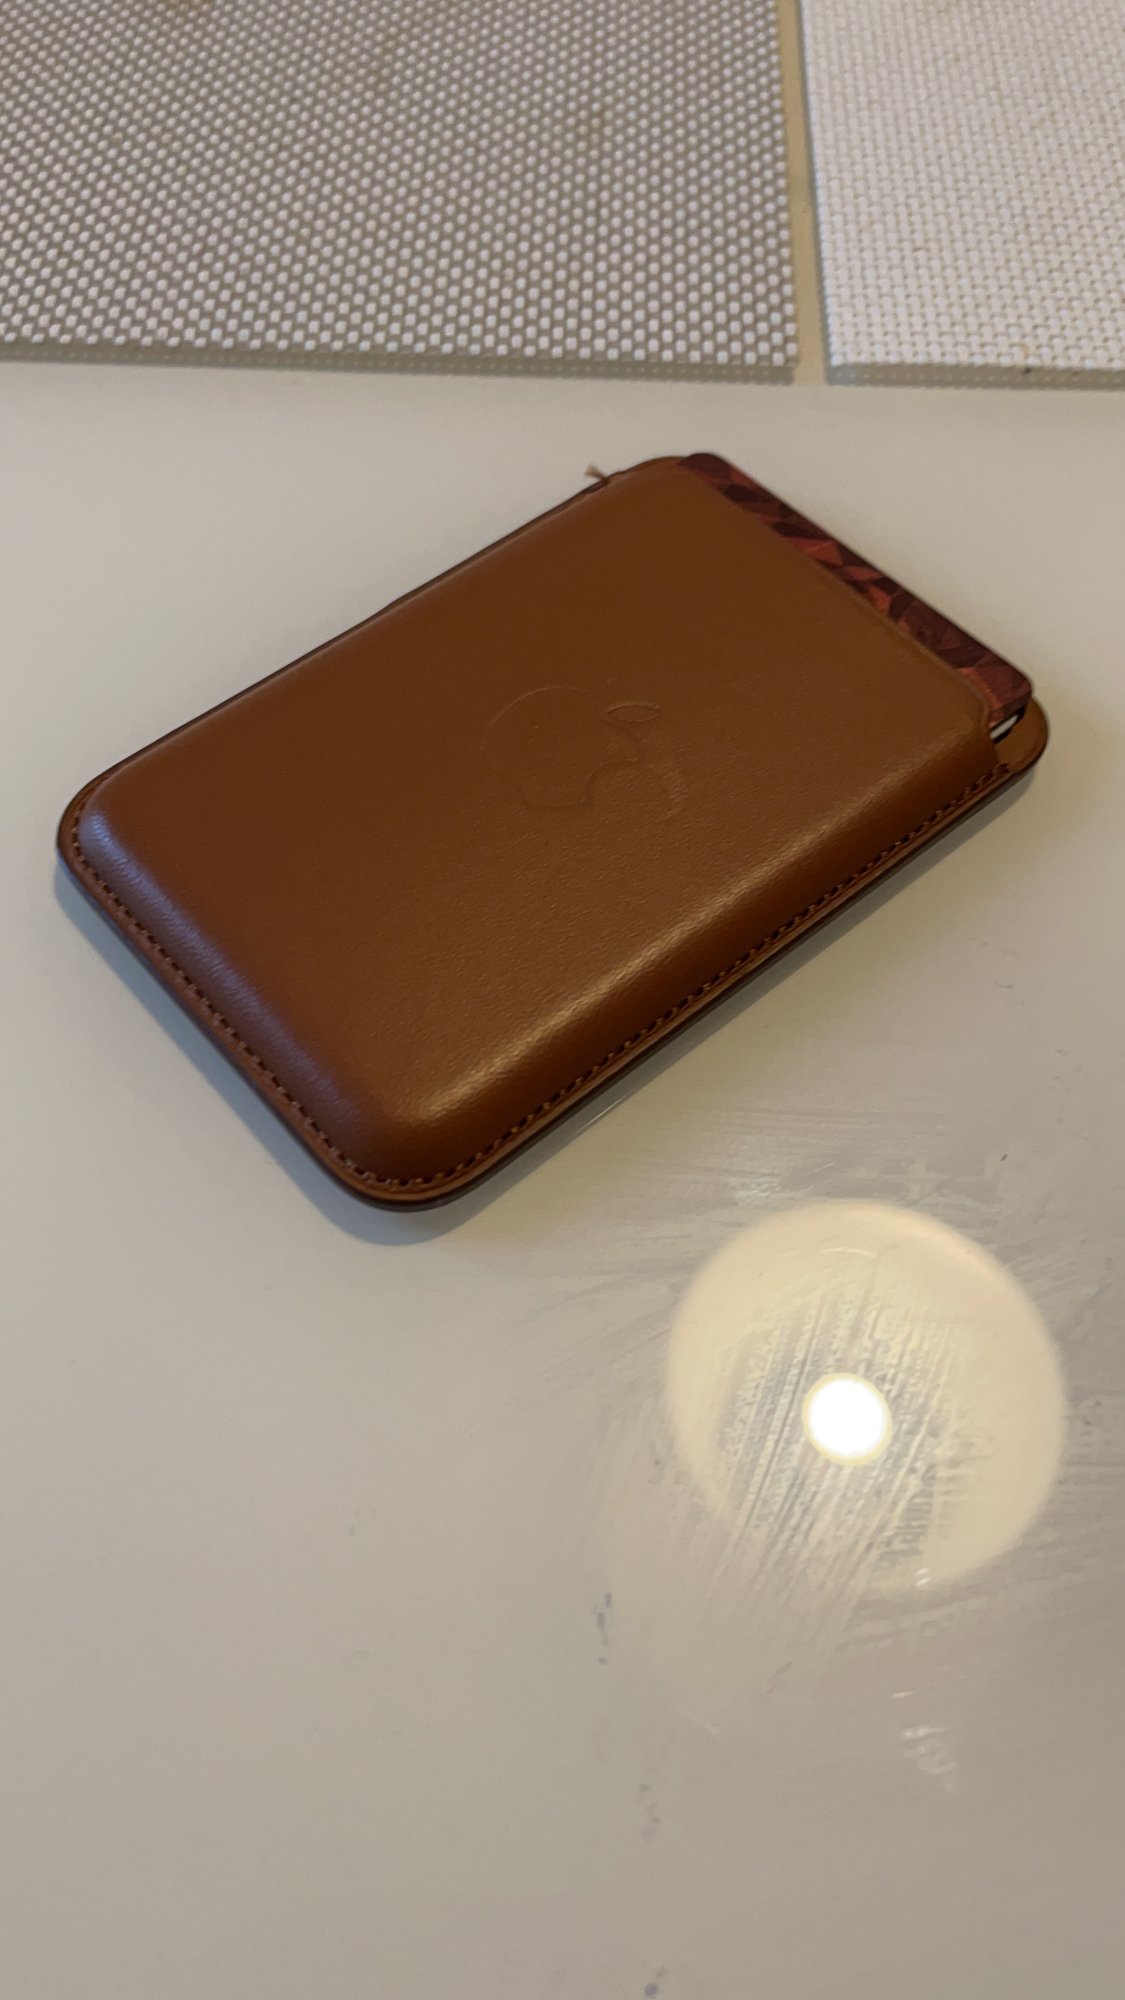 Apple Leather Wallet - Order Thread | Page 36 | MacRumors Forums